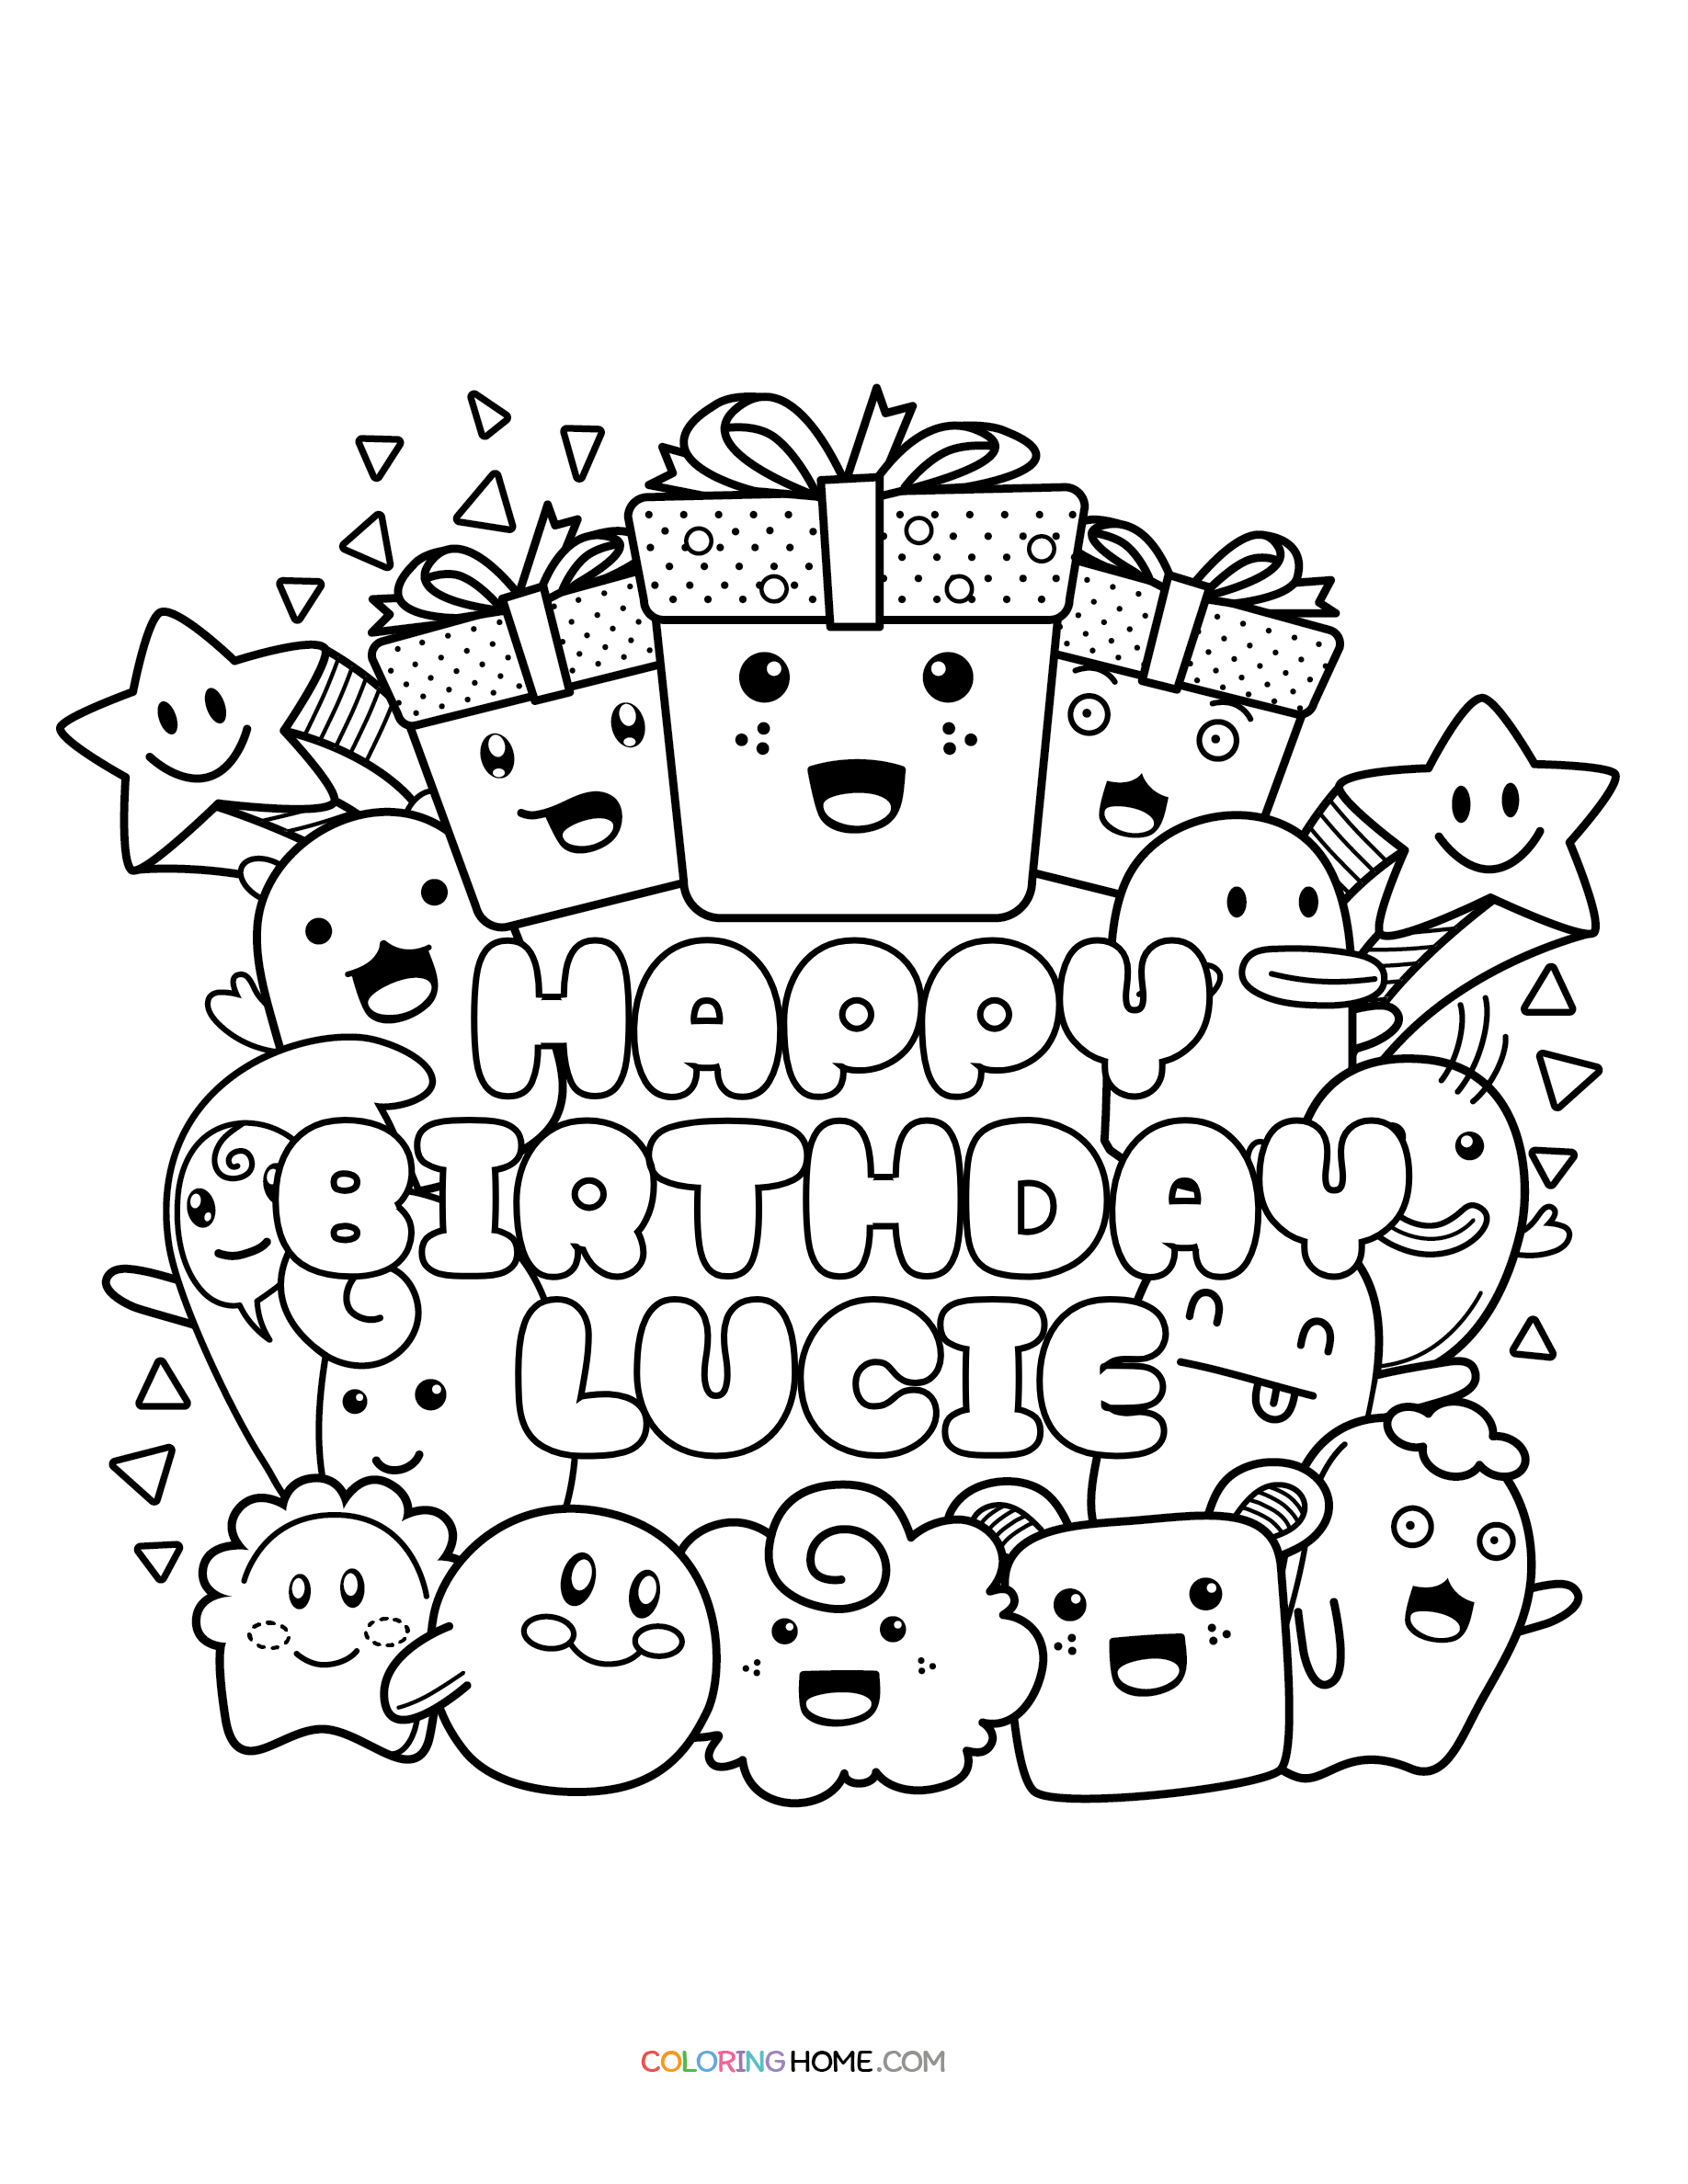 Happy Birthday Lucie coloring page